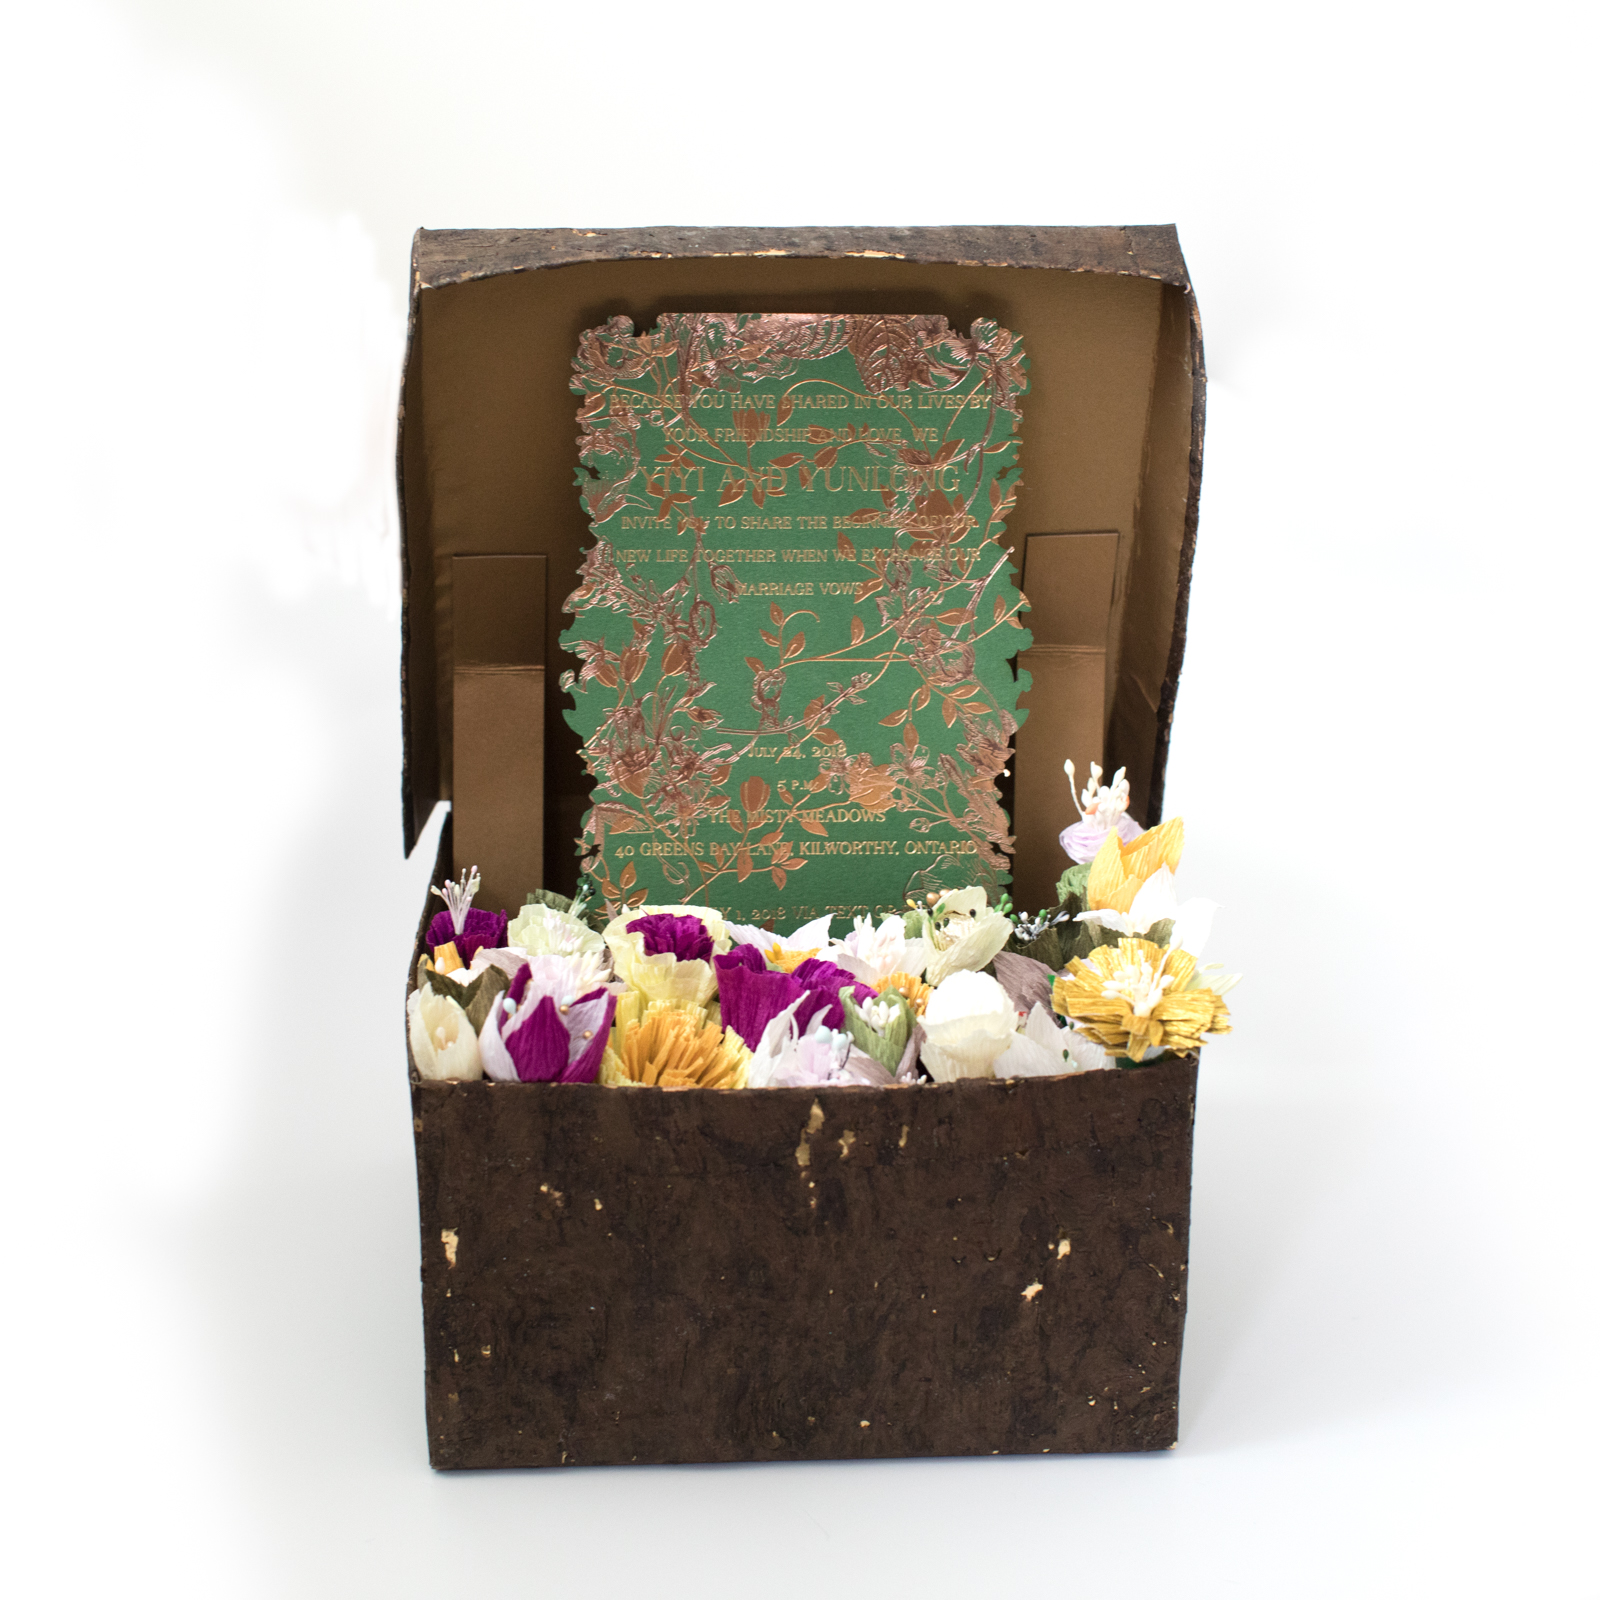 An invitation in a box full of flowers.